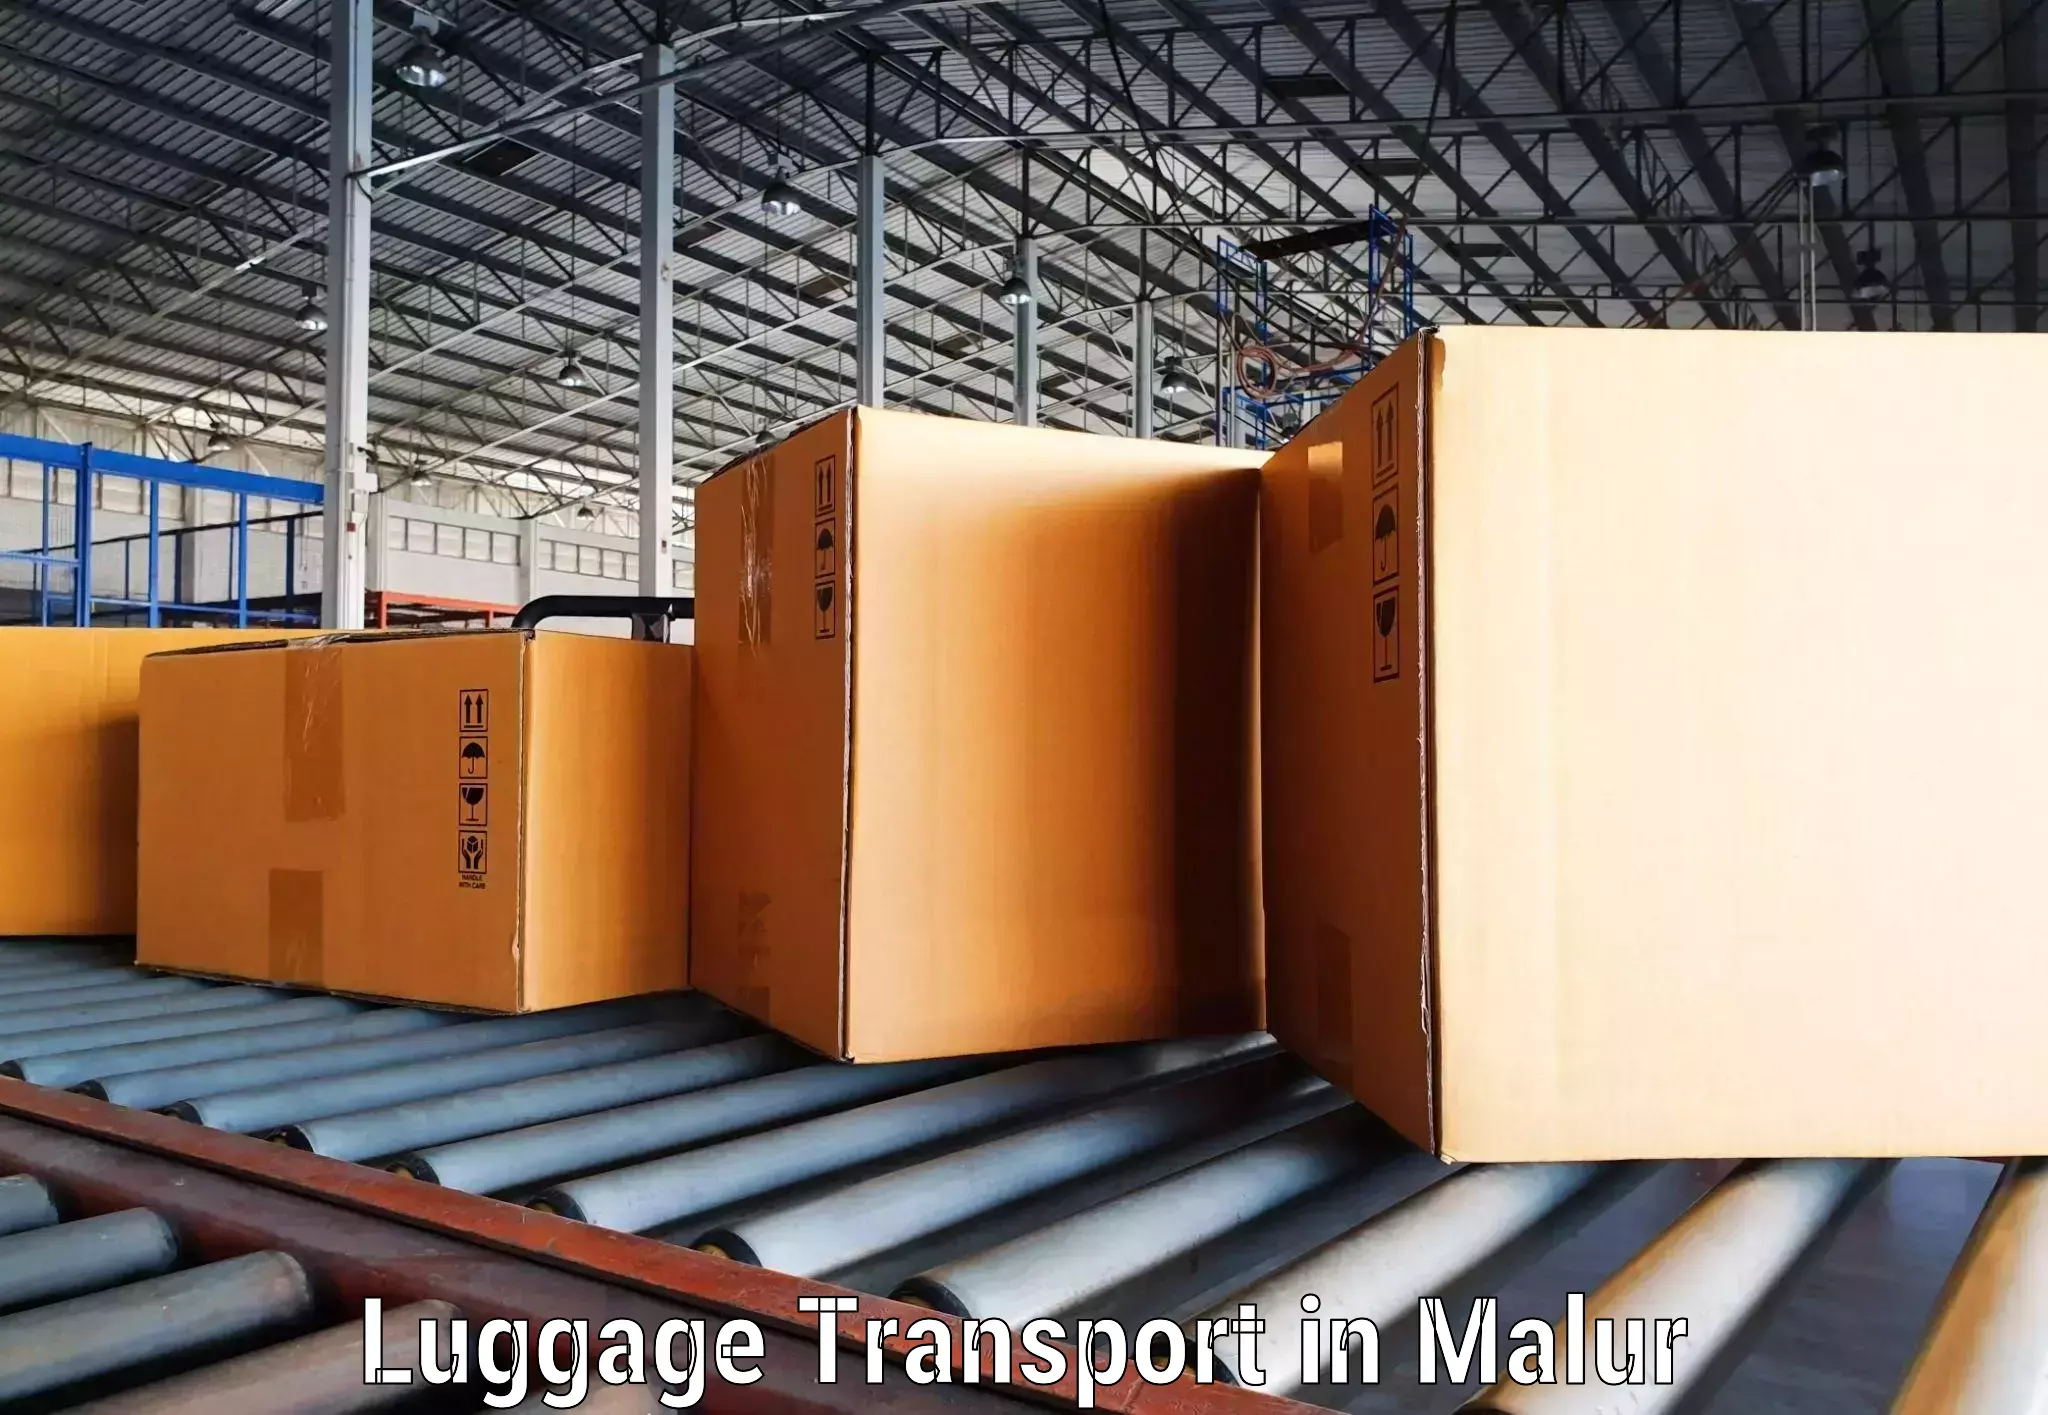 Luggage transport service in Malur